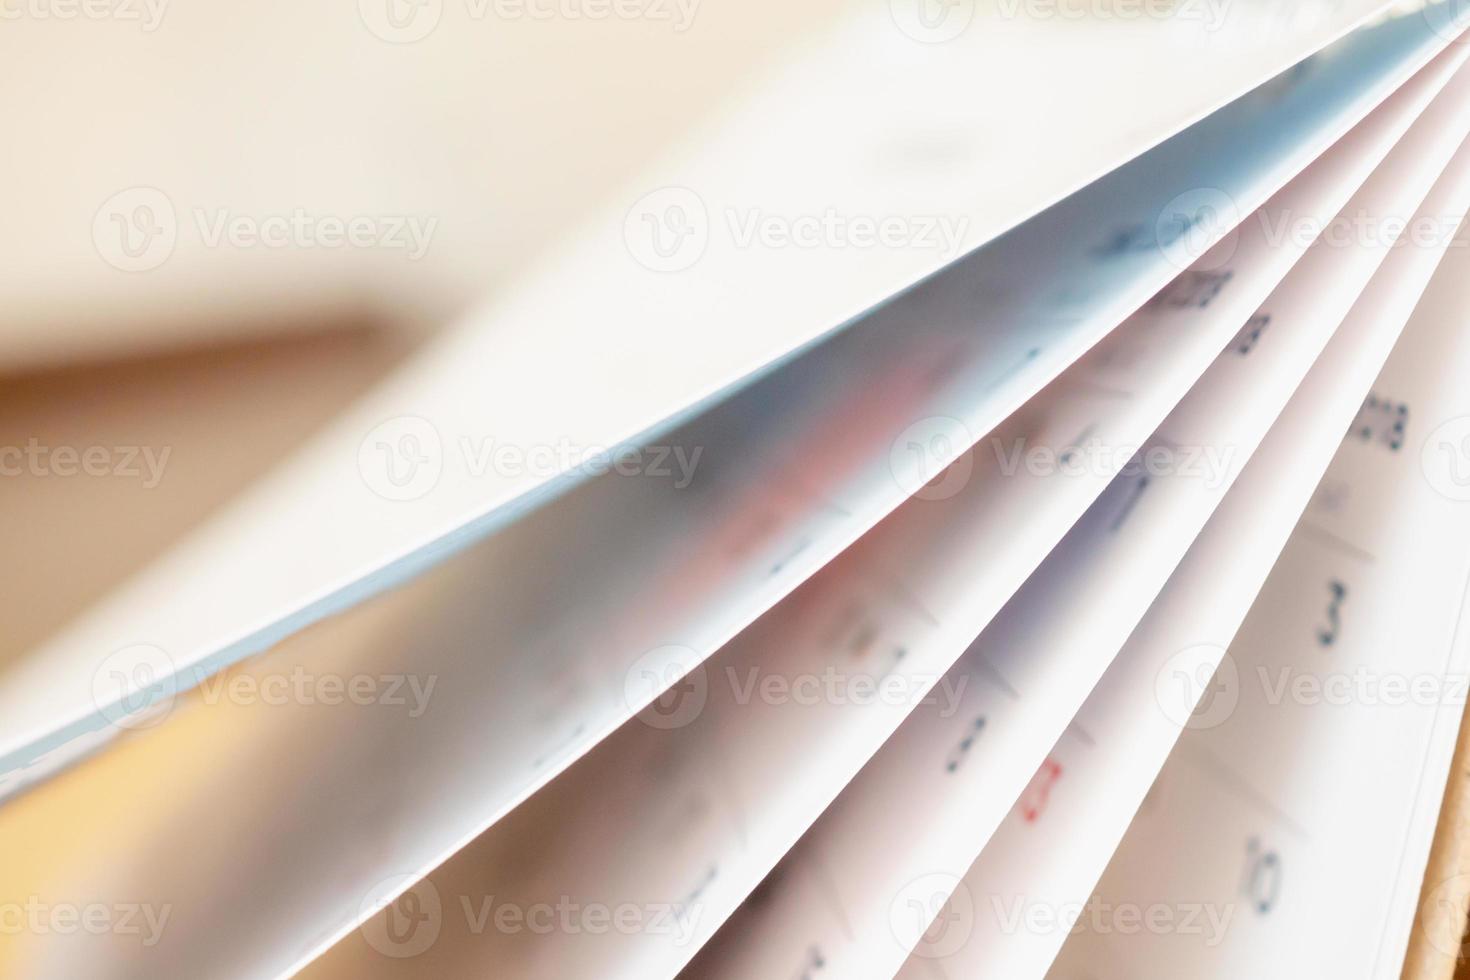 Abstract blur calendar page flipping sheet close up background photo